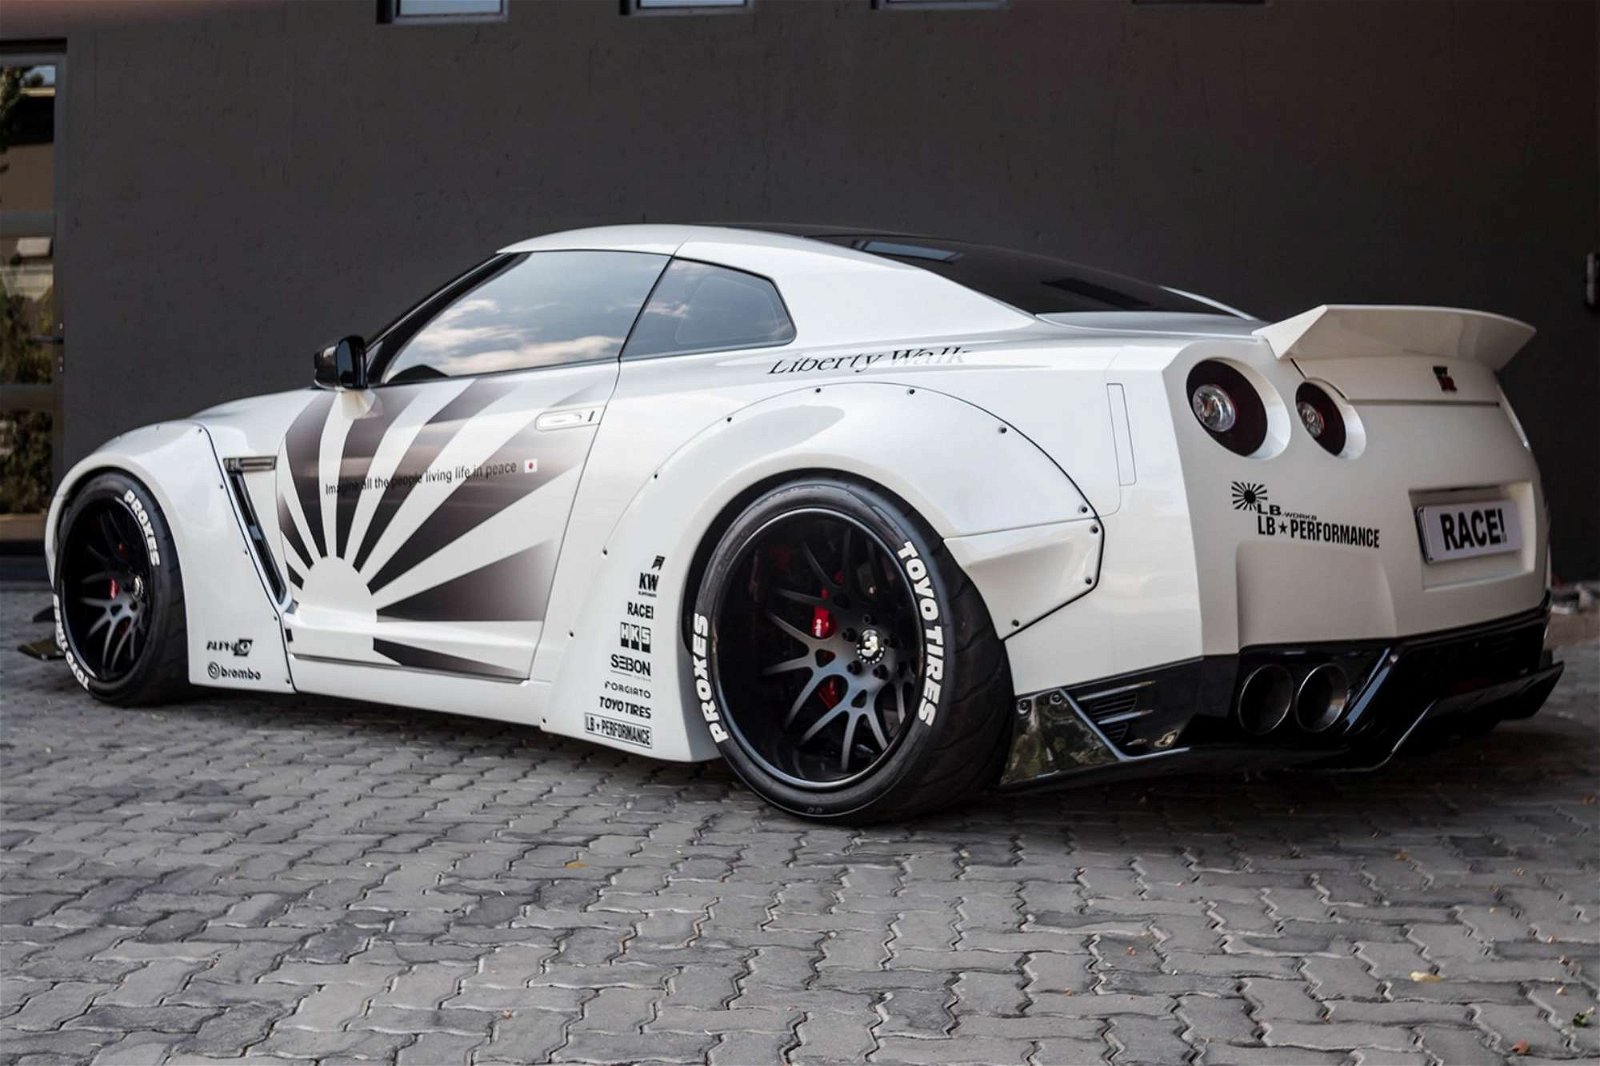 nissan-gt-r-08-by-race-and-lb